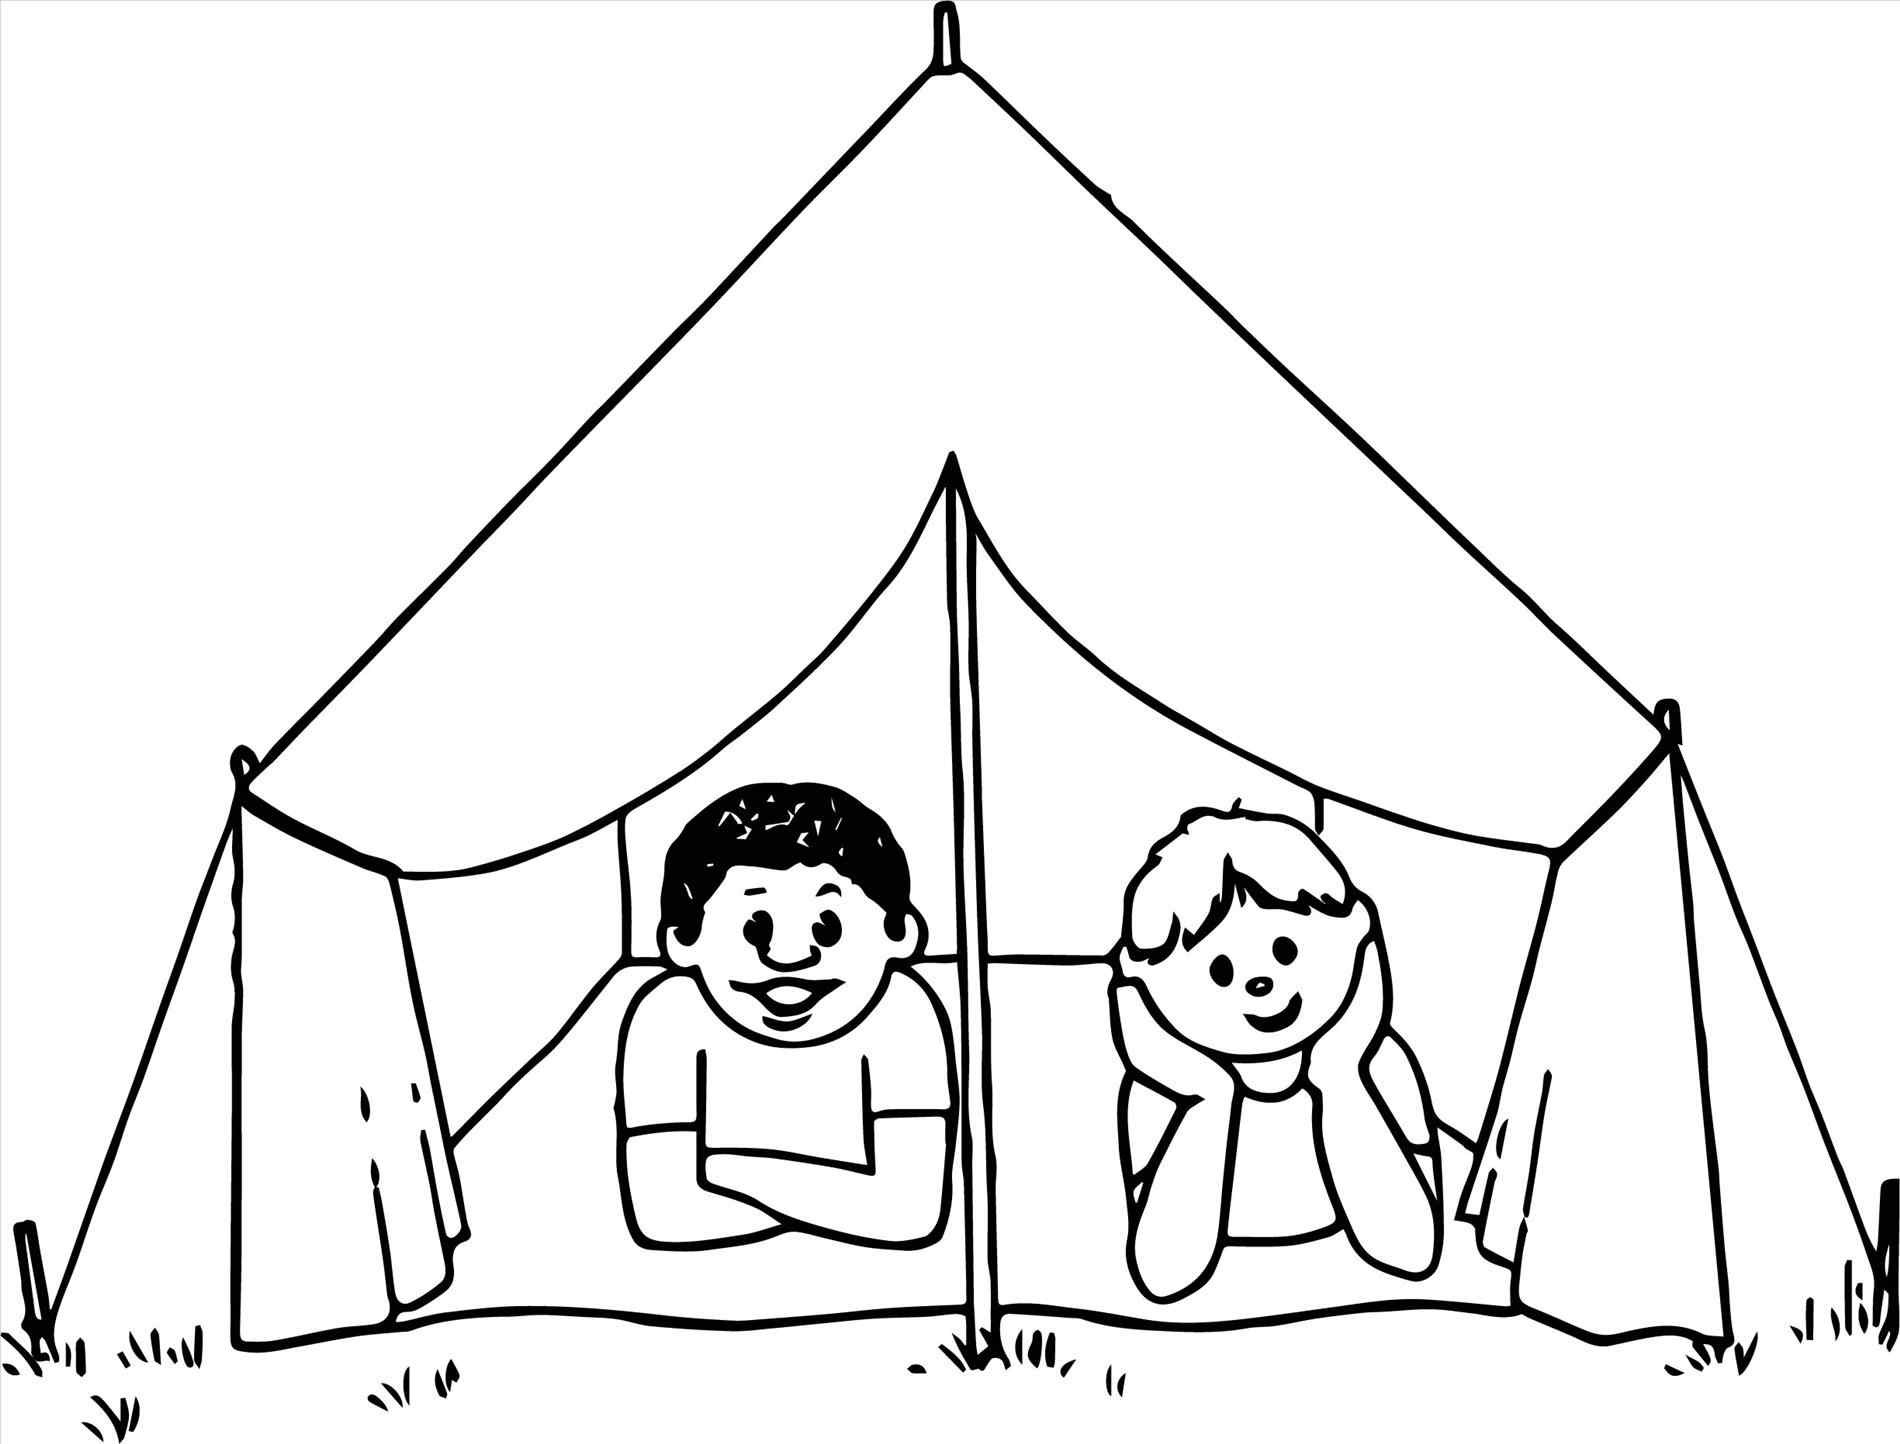 Camping Tent Clip Art Sketch Coloring Page 4368 | The Best Porn Website